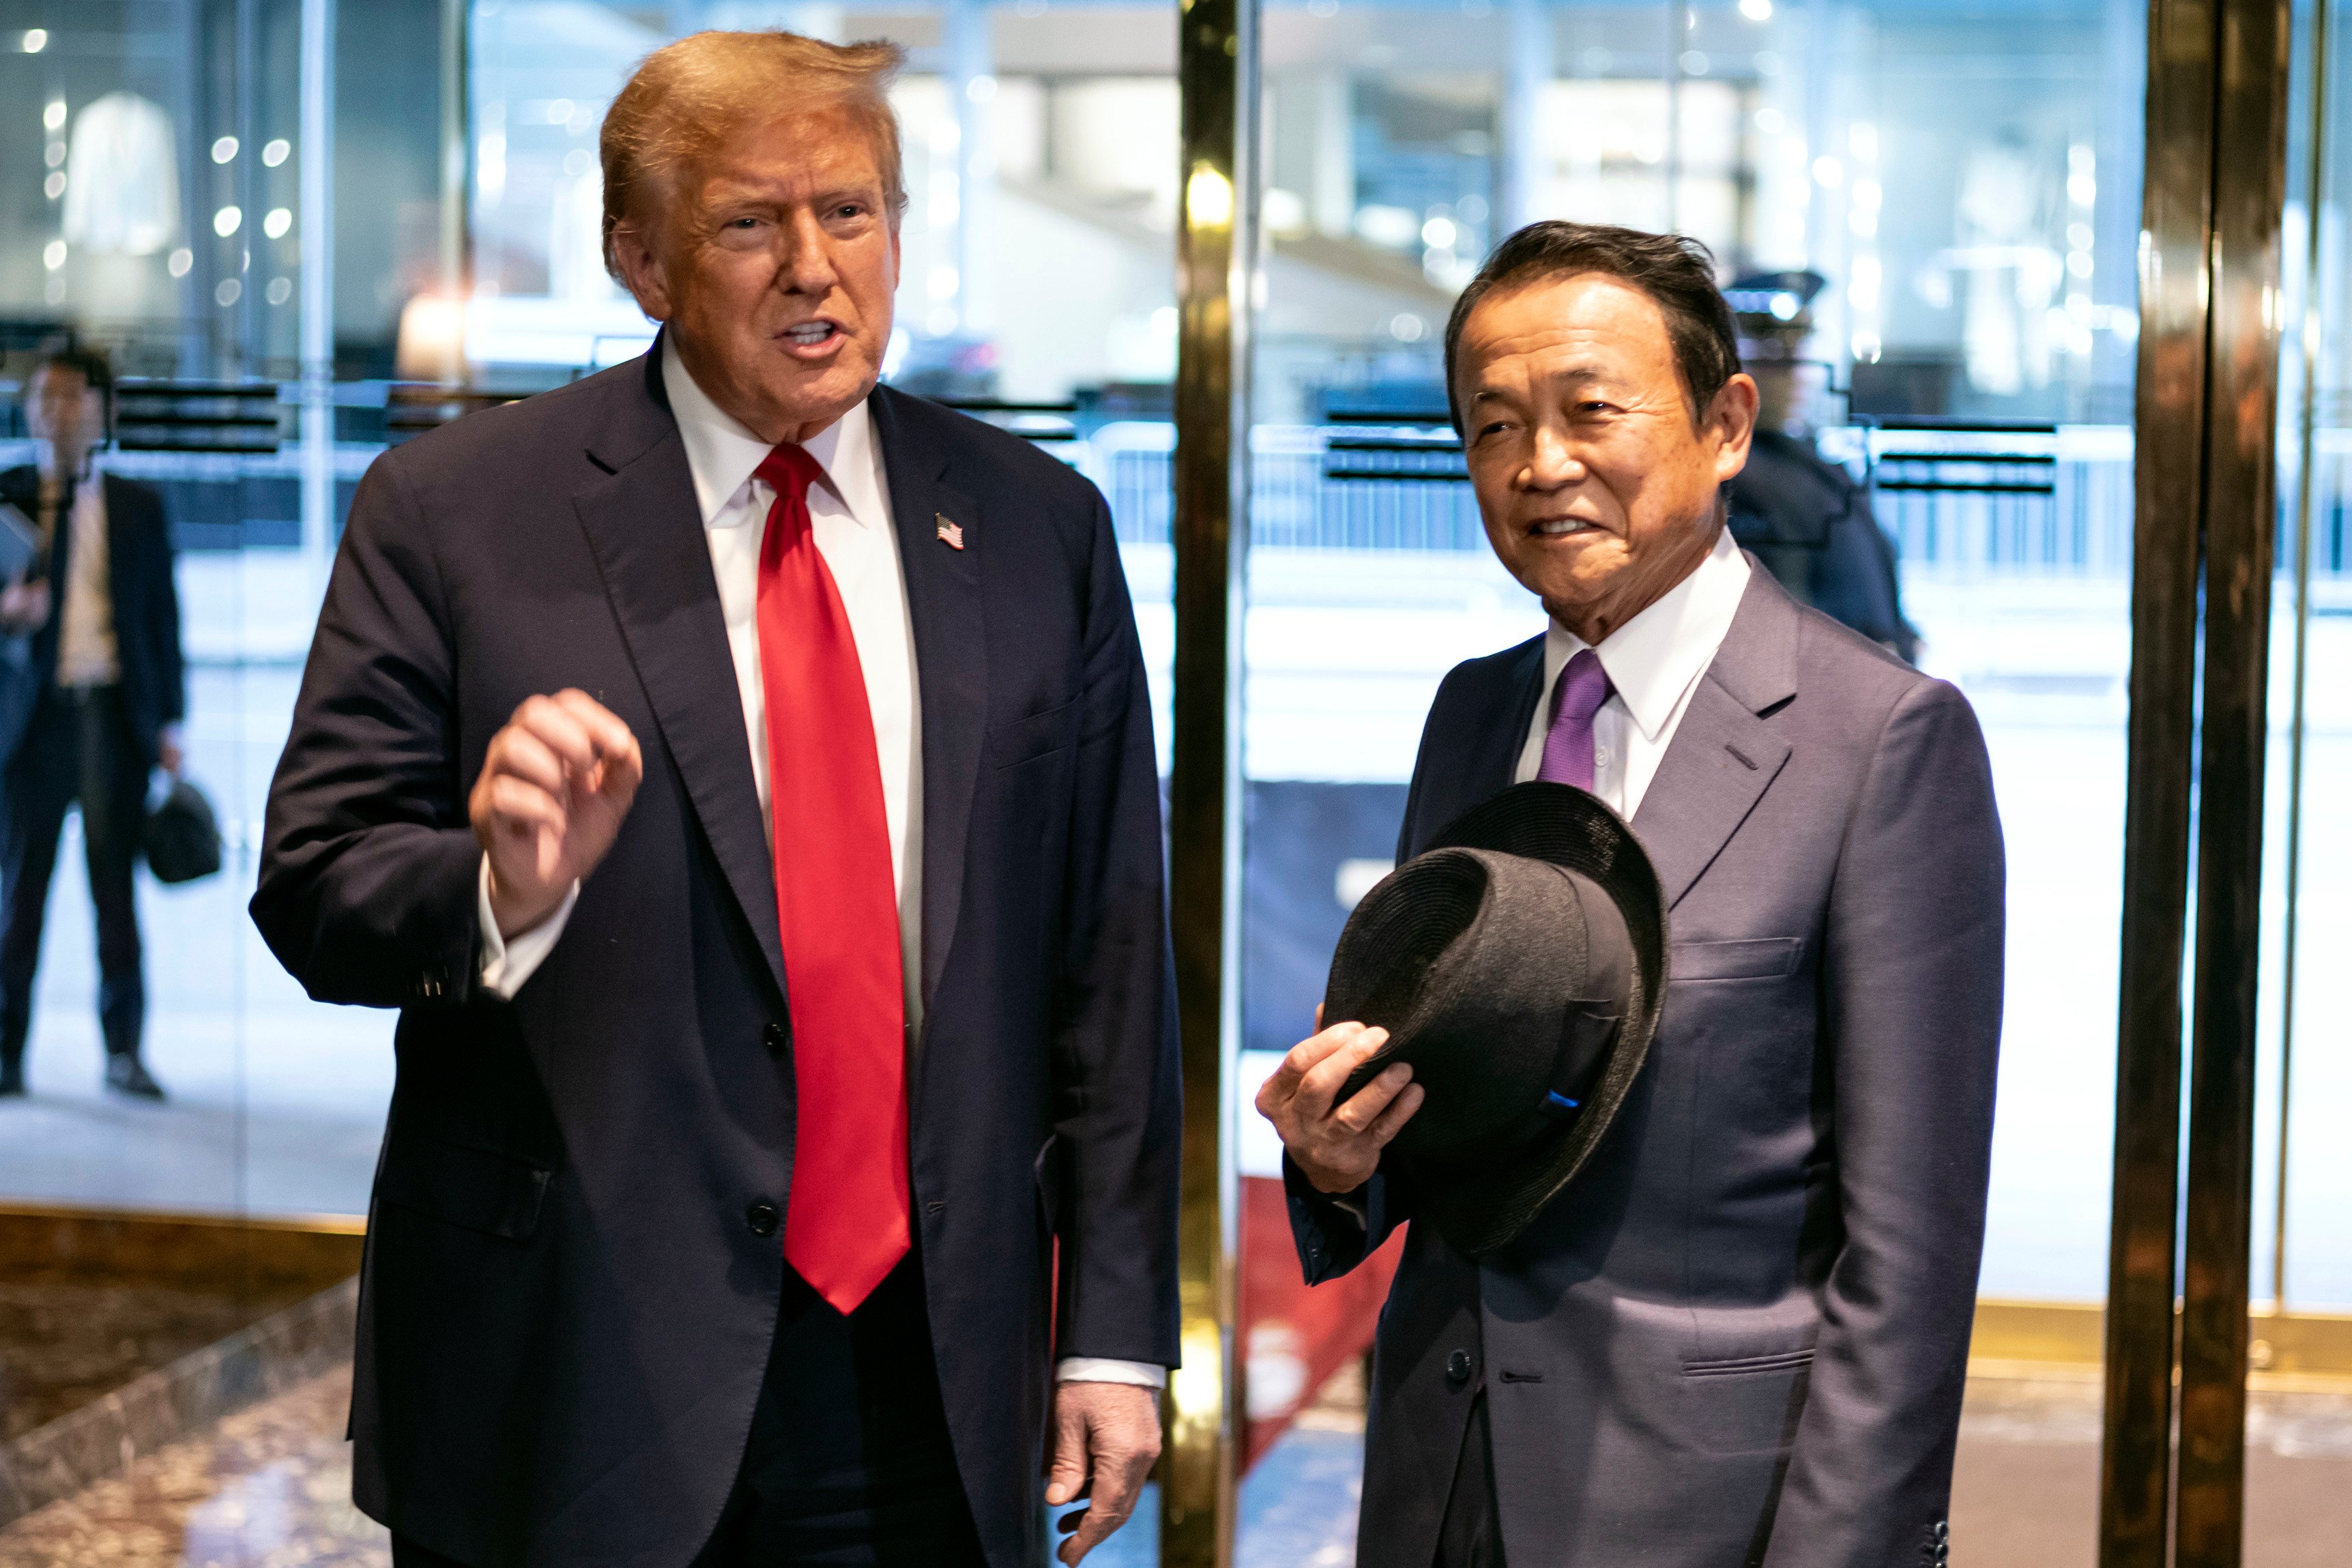 Donald Trump meets with former Japanese prime minister Taro Aso at Trump Tower in in New York. Photo: AP